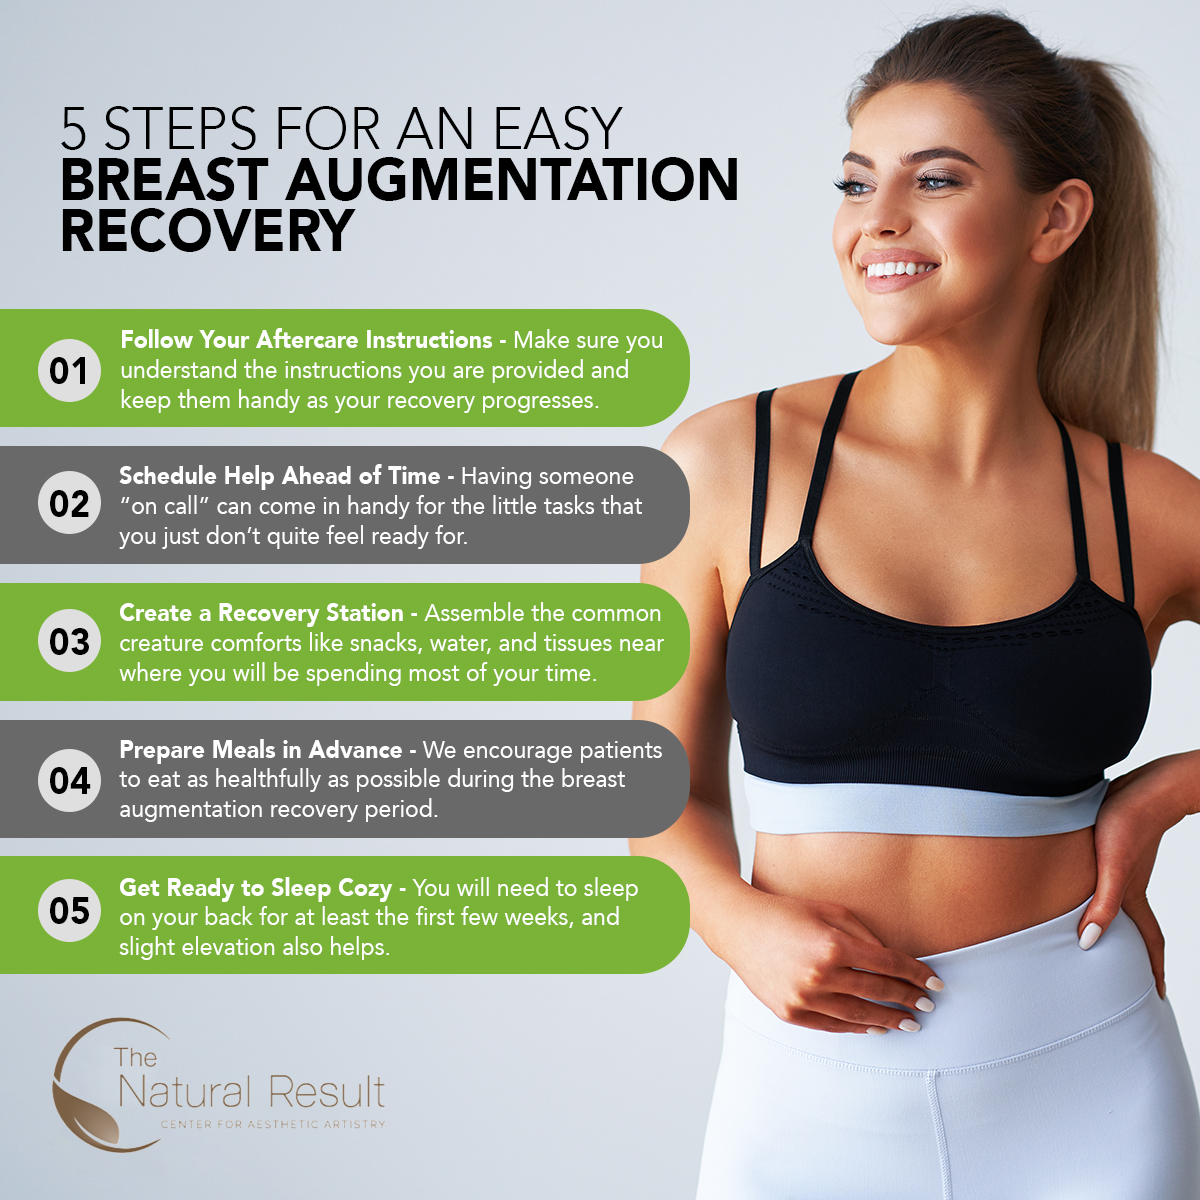 Easy Breast Augmentation Recovery